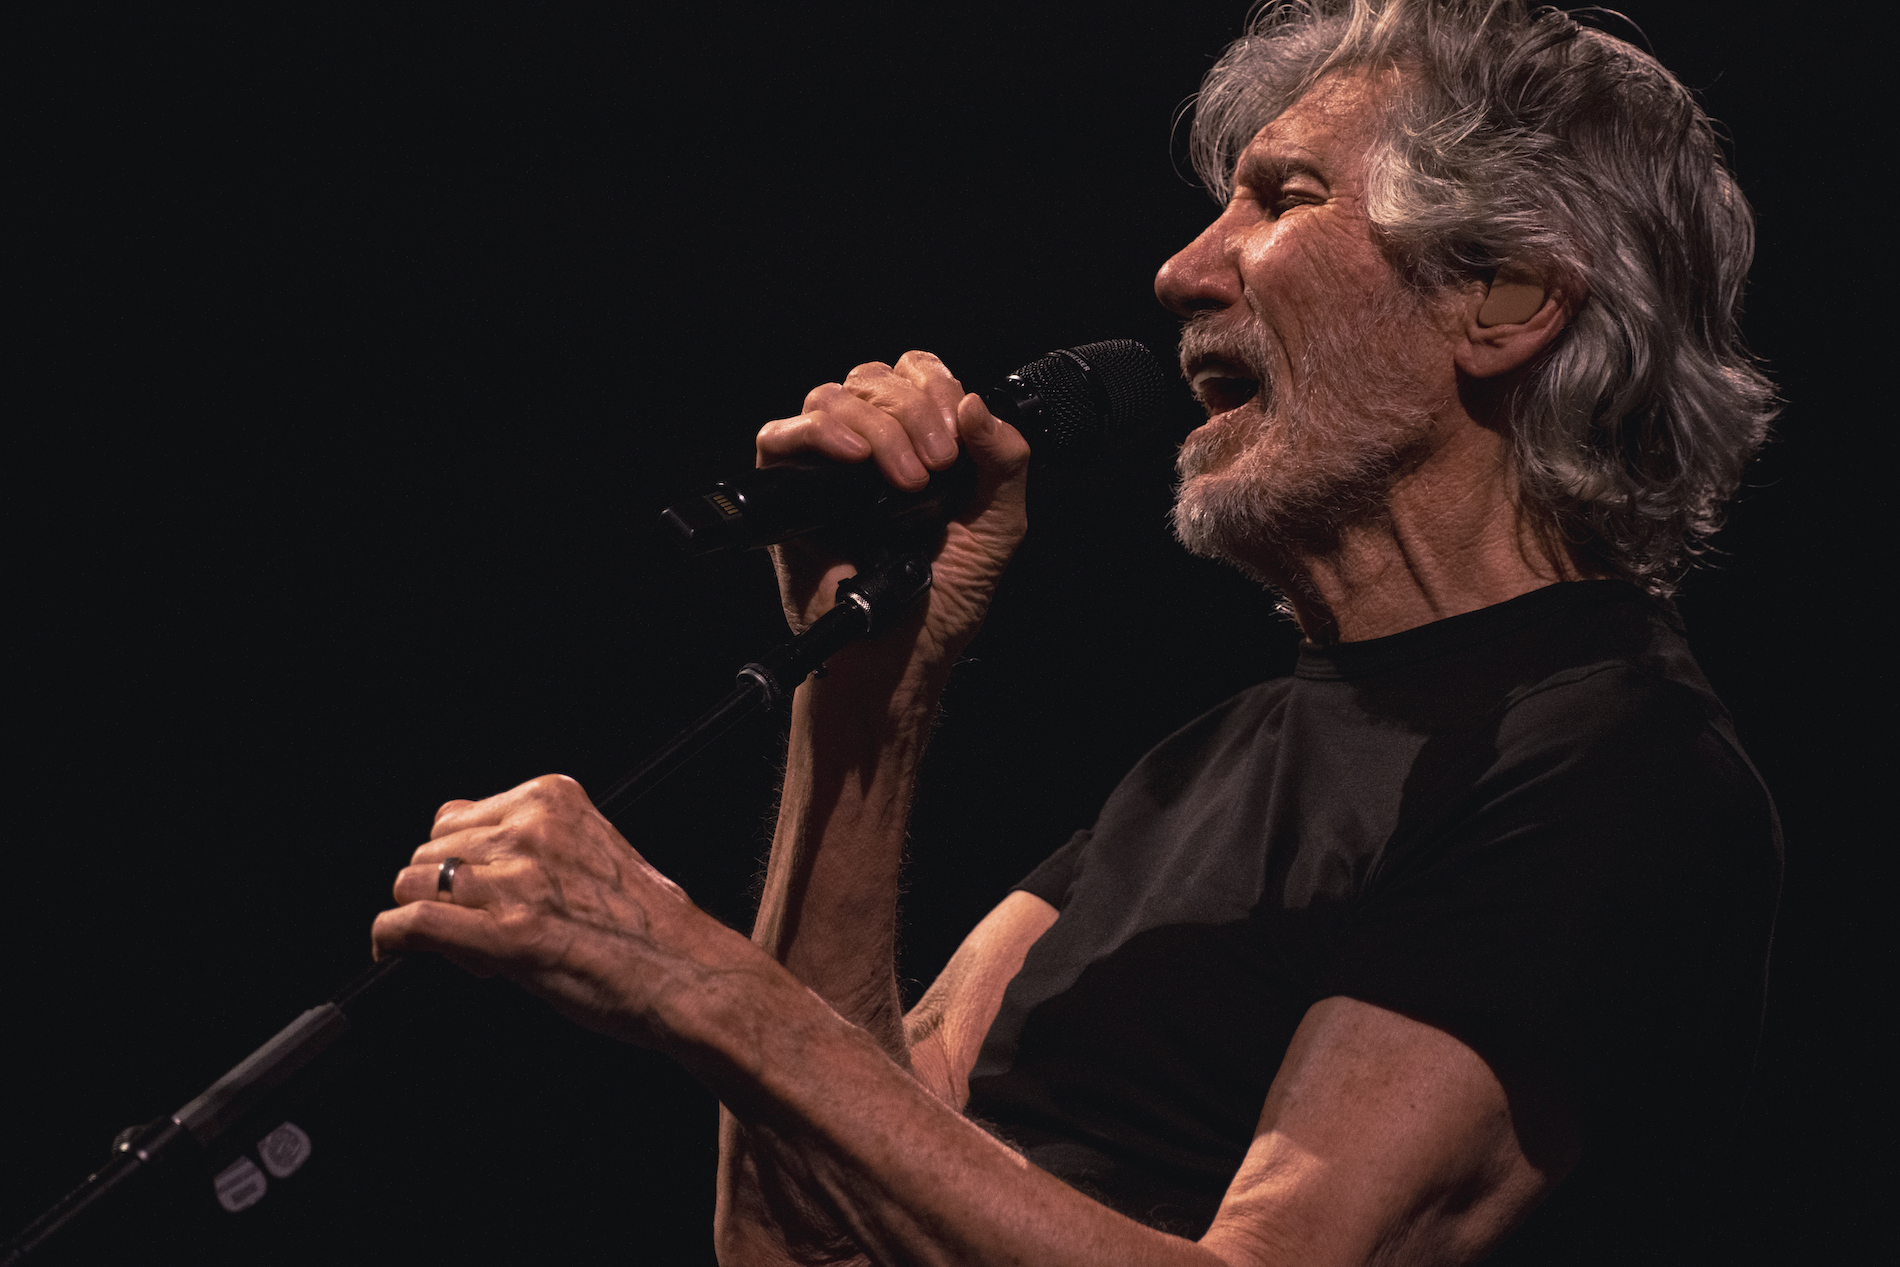 last tour roger waters